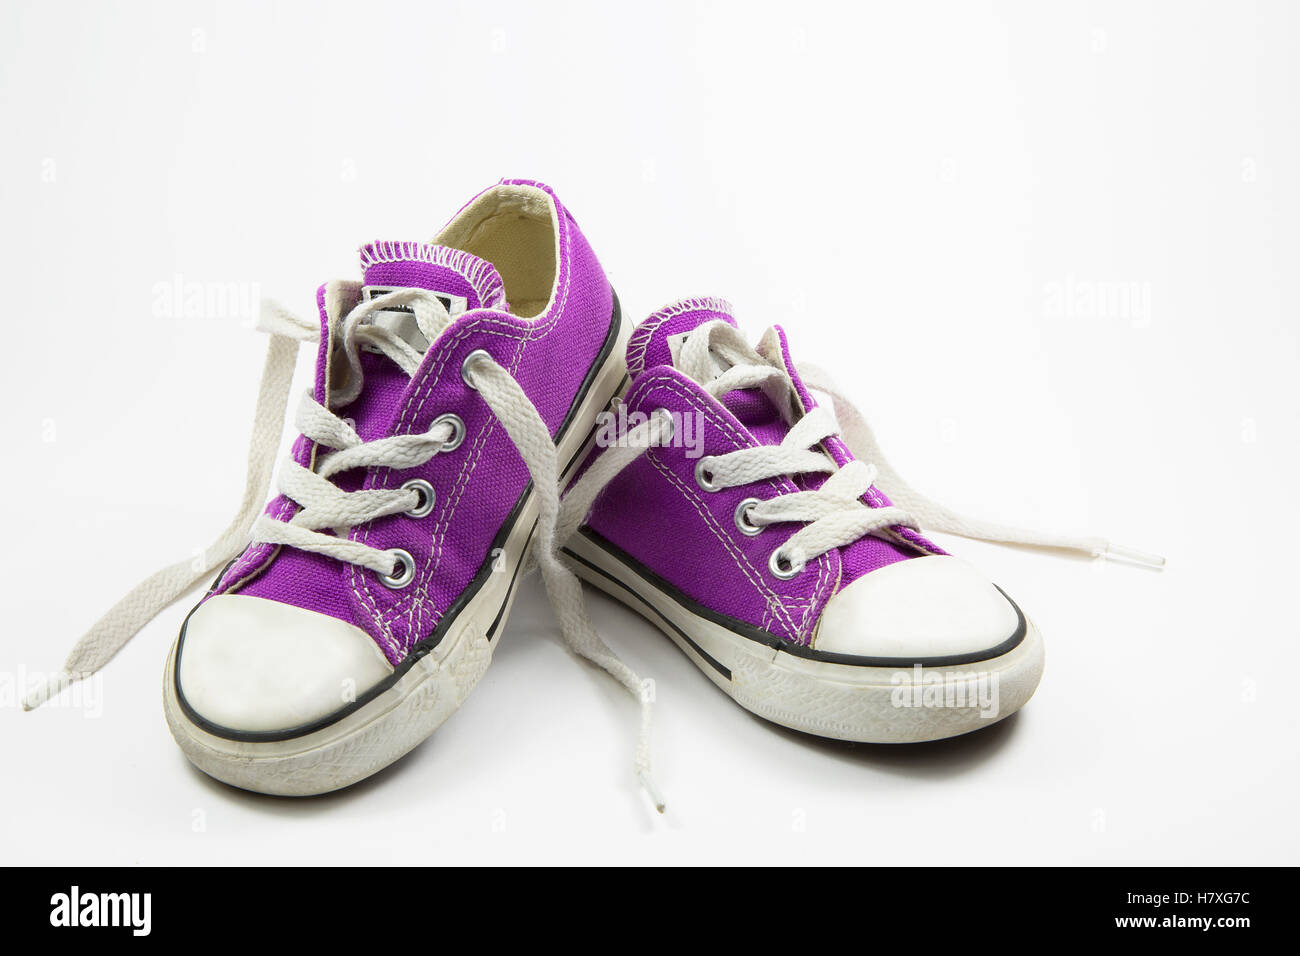 Tying Shoes And Kid High Resolution Stock Photography and Images - Alamy